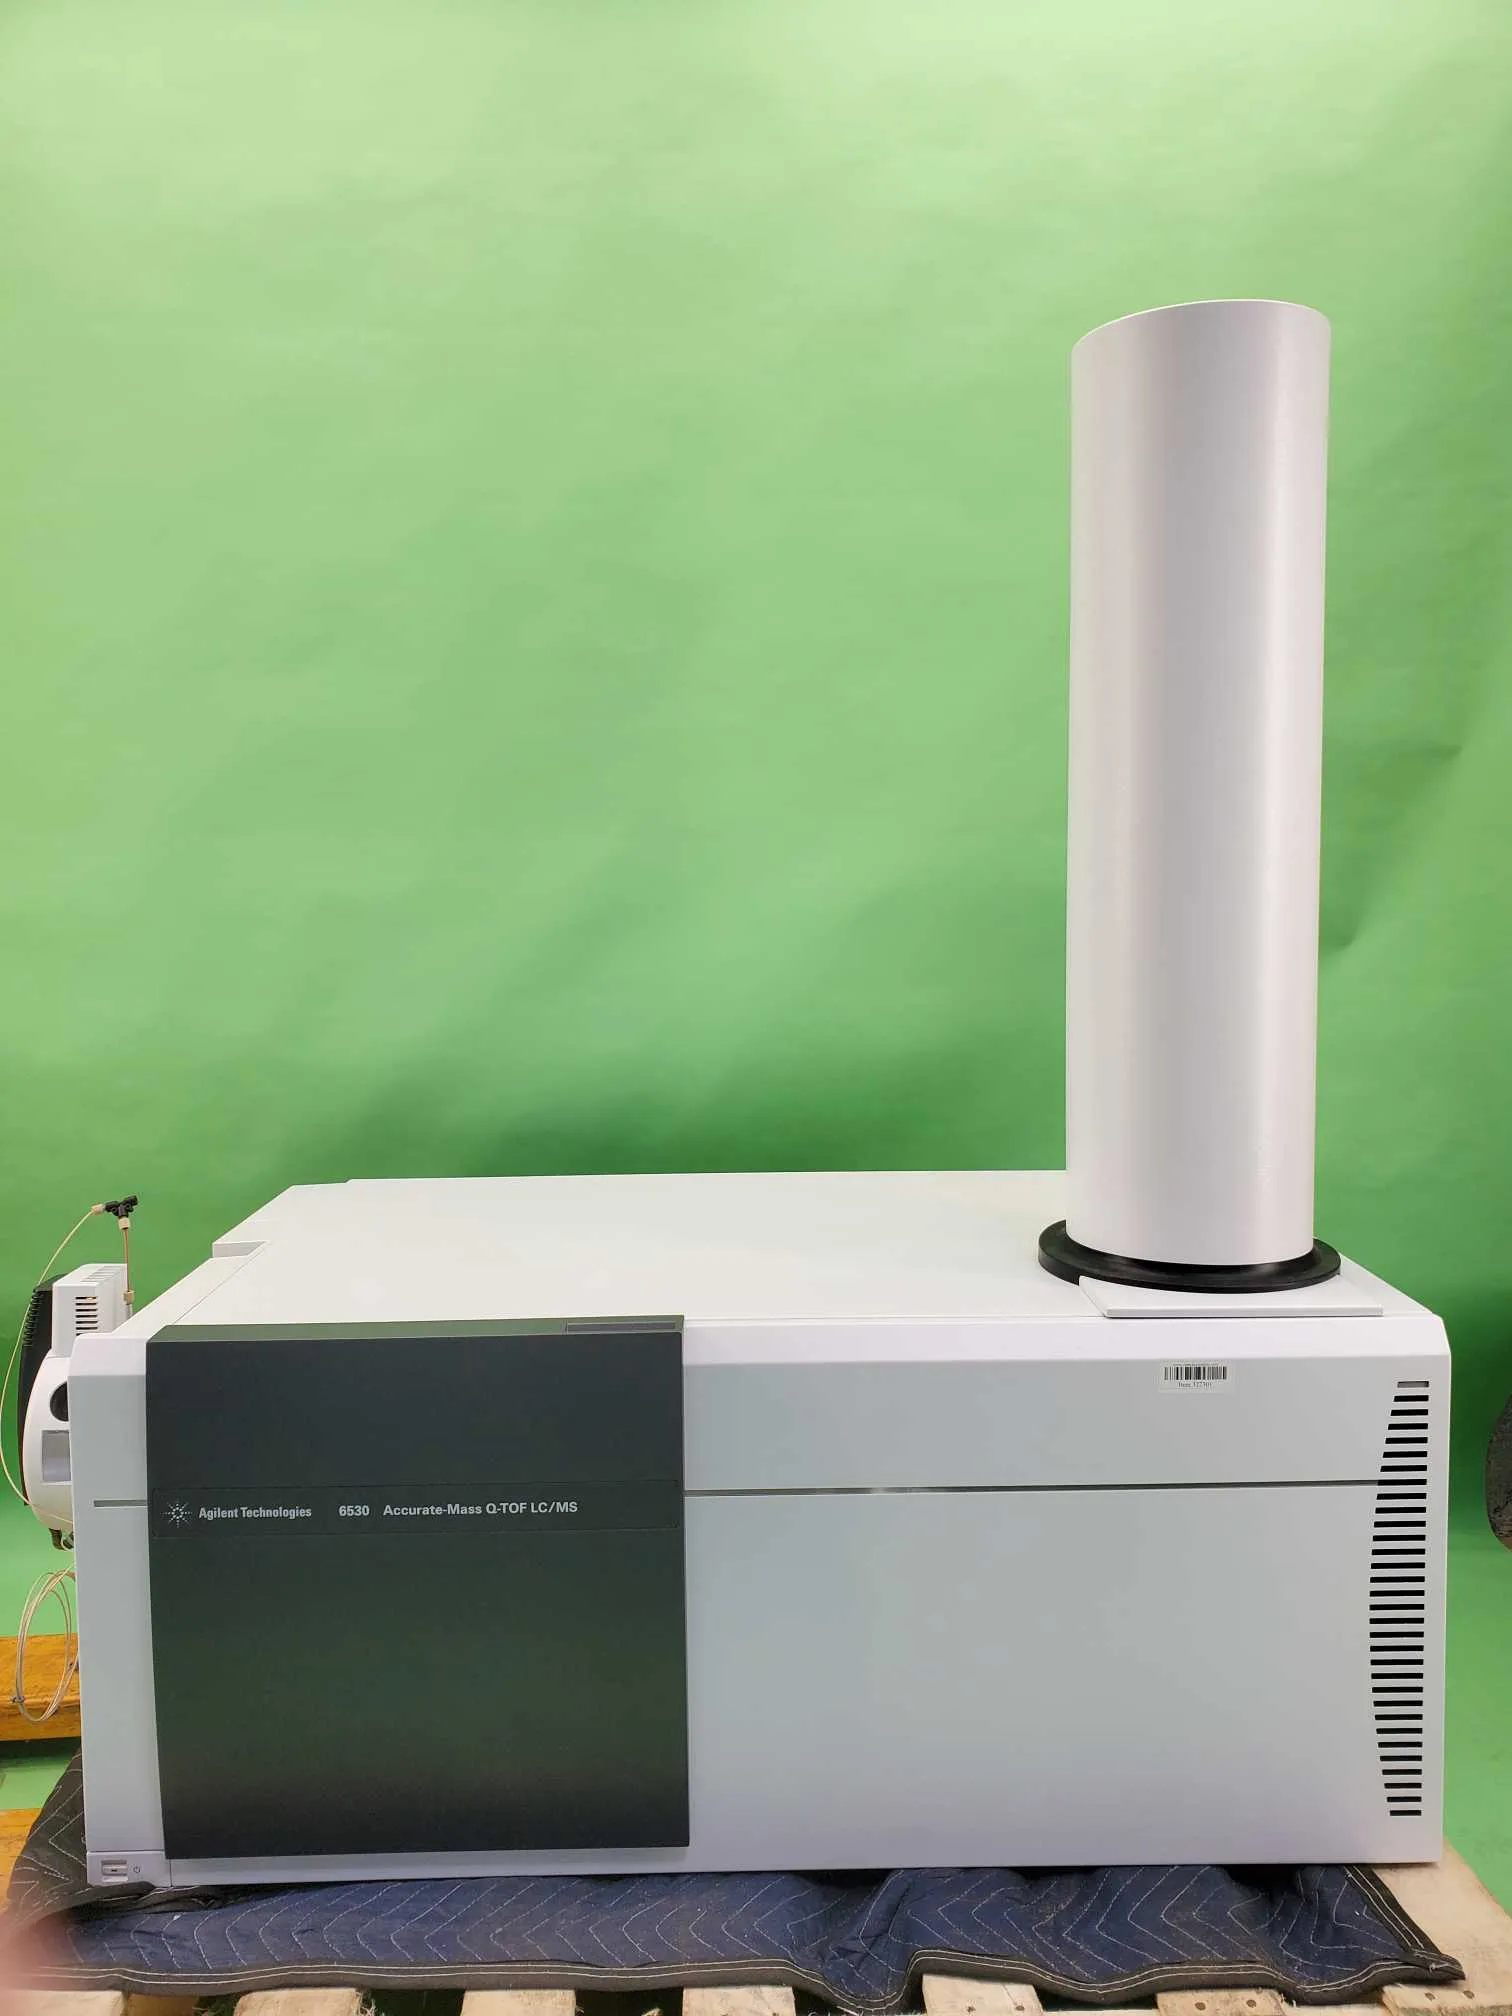 Agilent Technologies 6530 Accurate-Mass TOF LC/MS